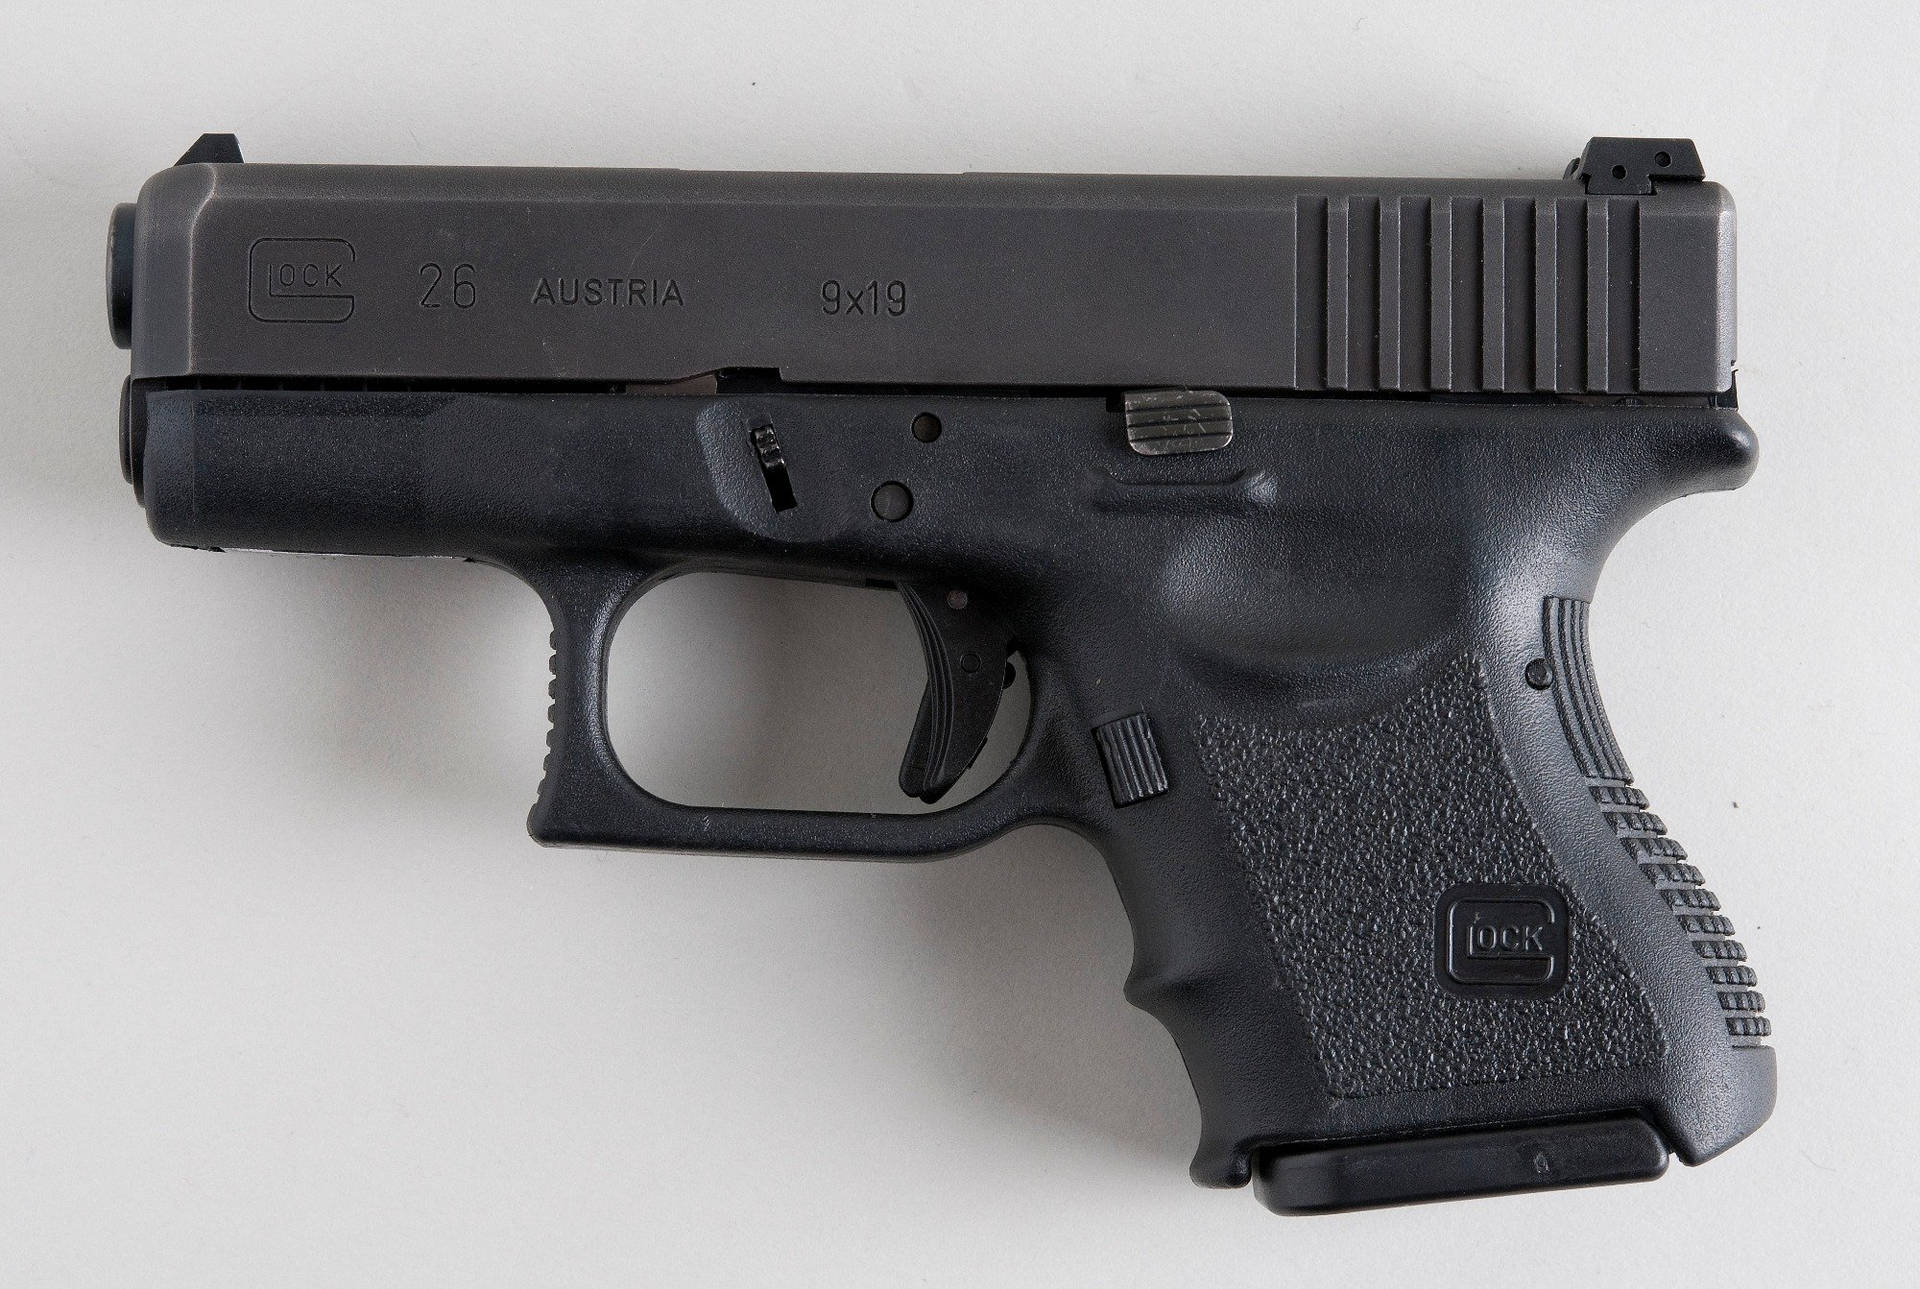 Glock Pistol - Precision And Safety Defined